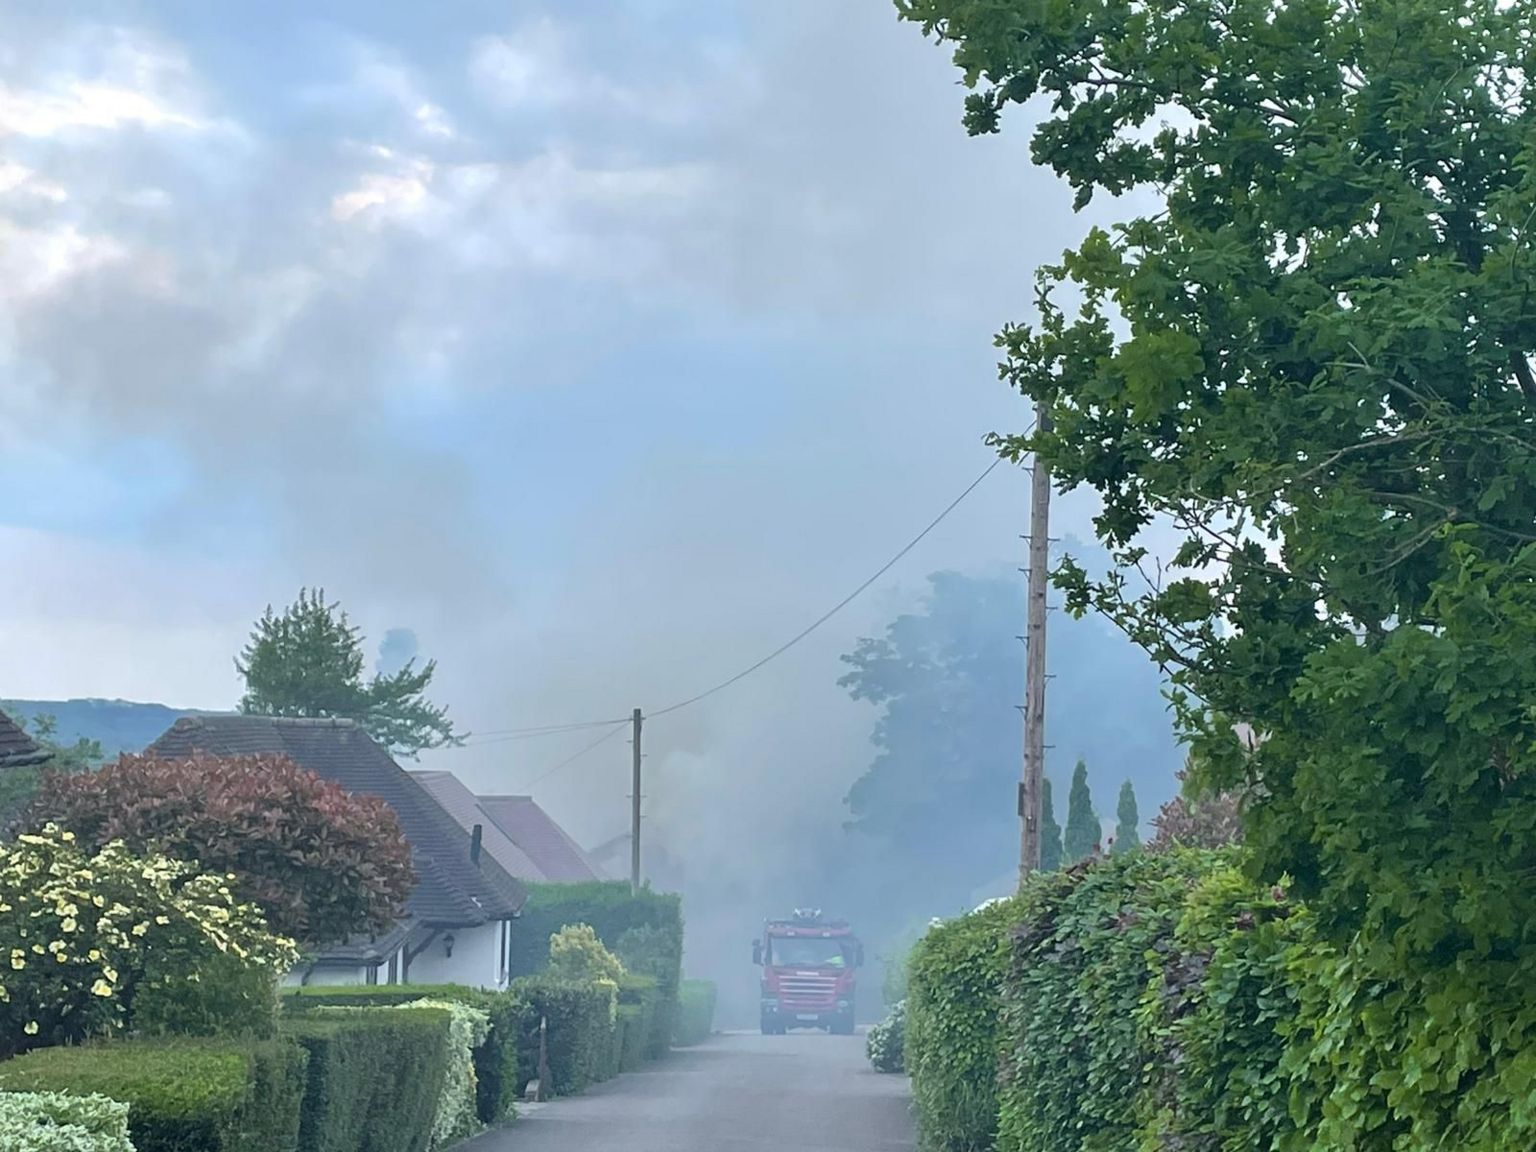 A cloud of smoke over nearby houses